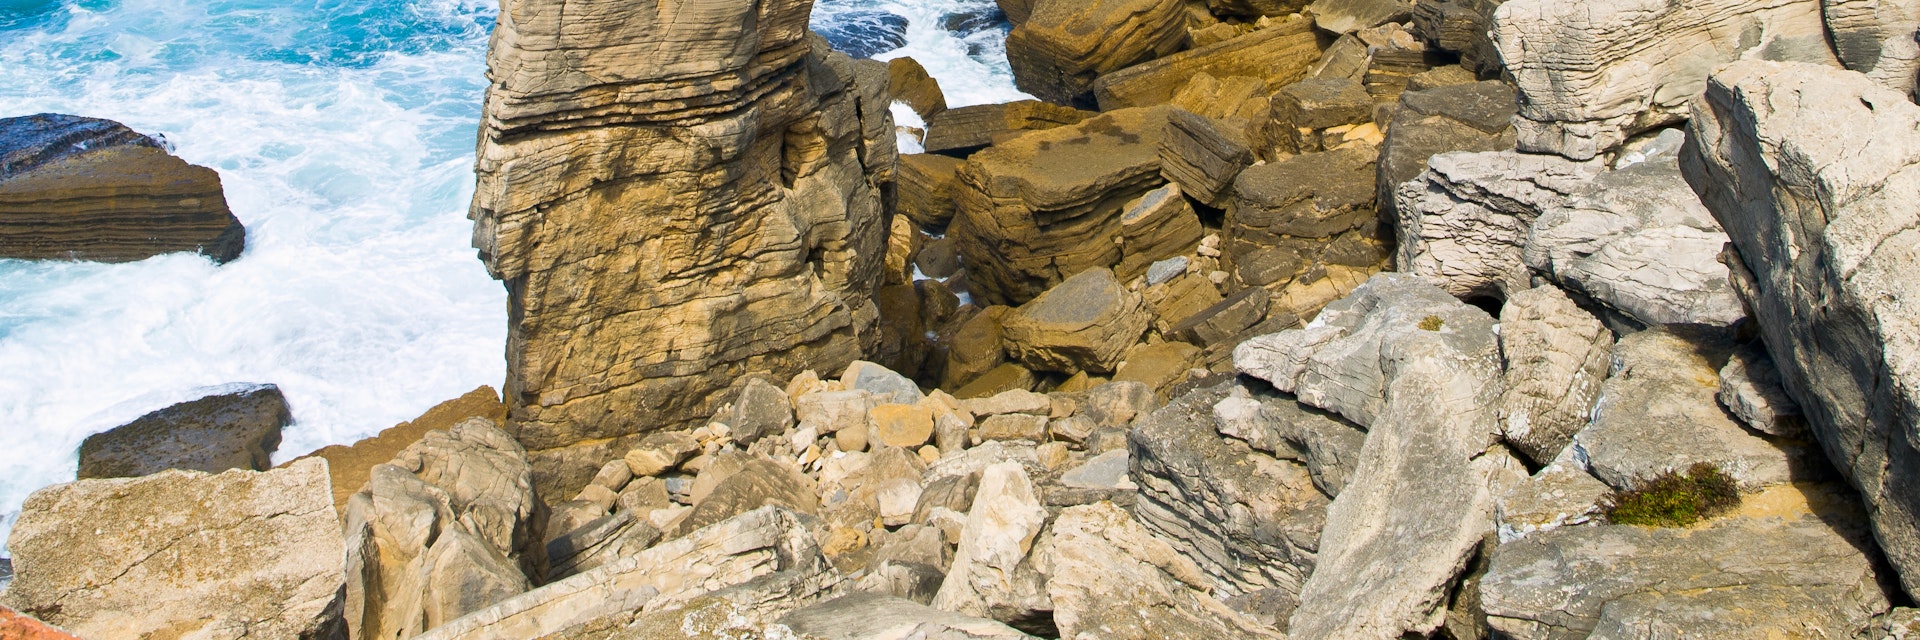 Rock formation by sea in Portugal